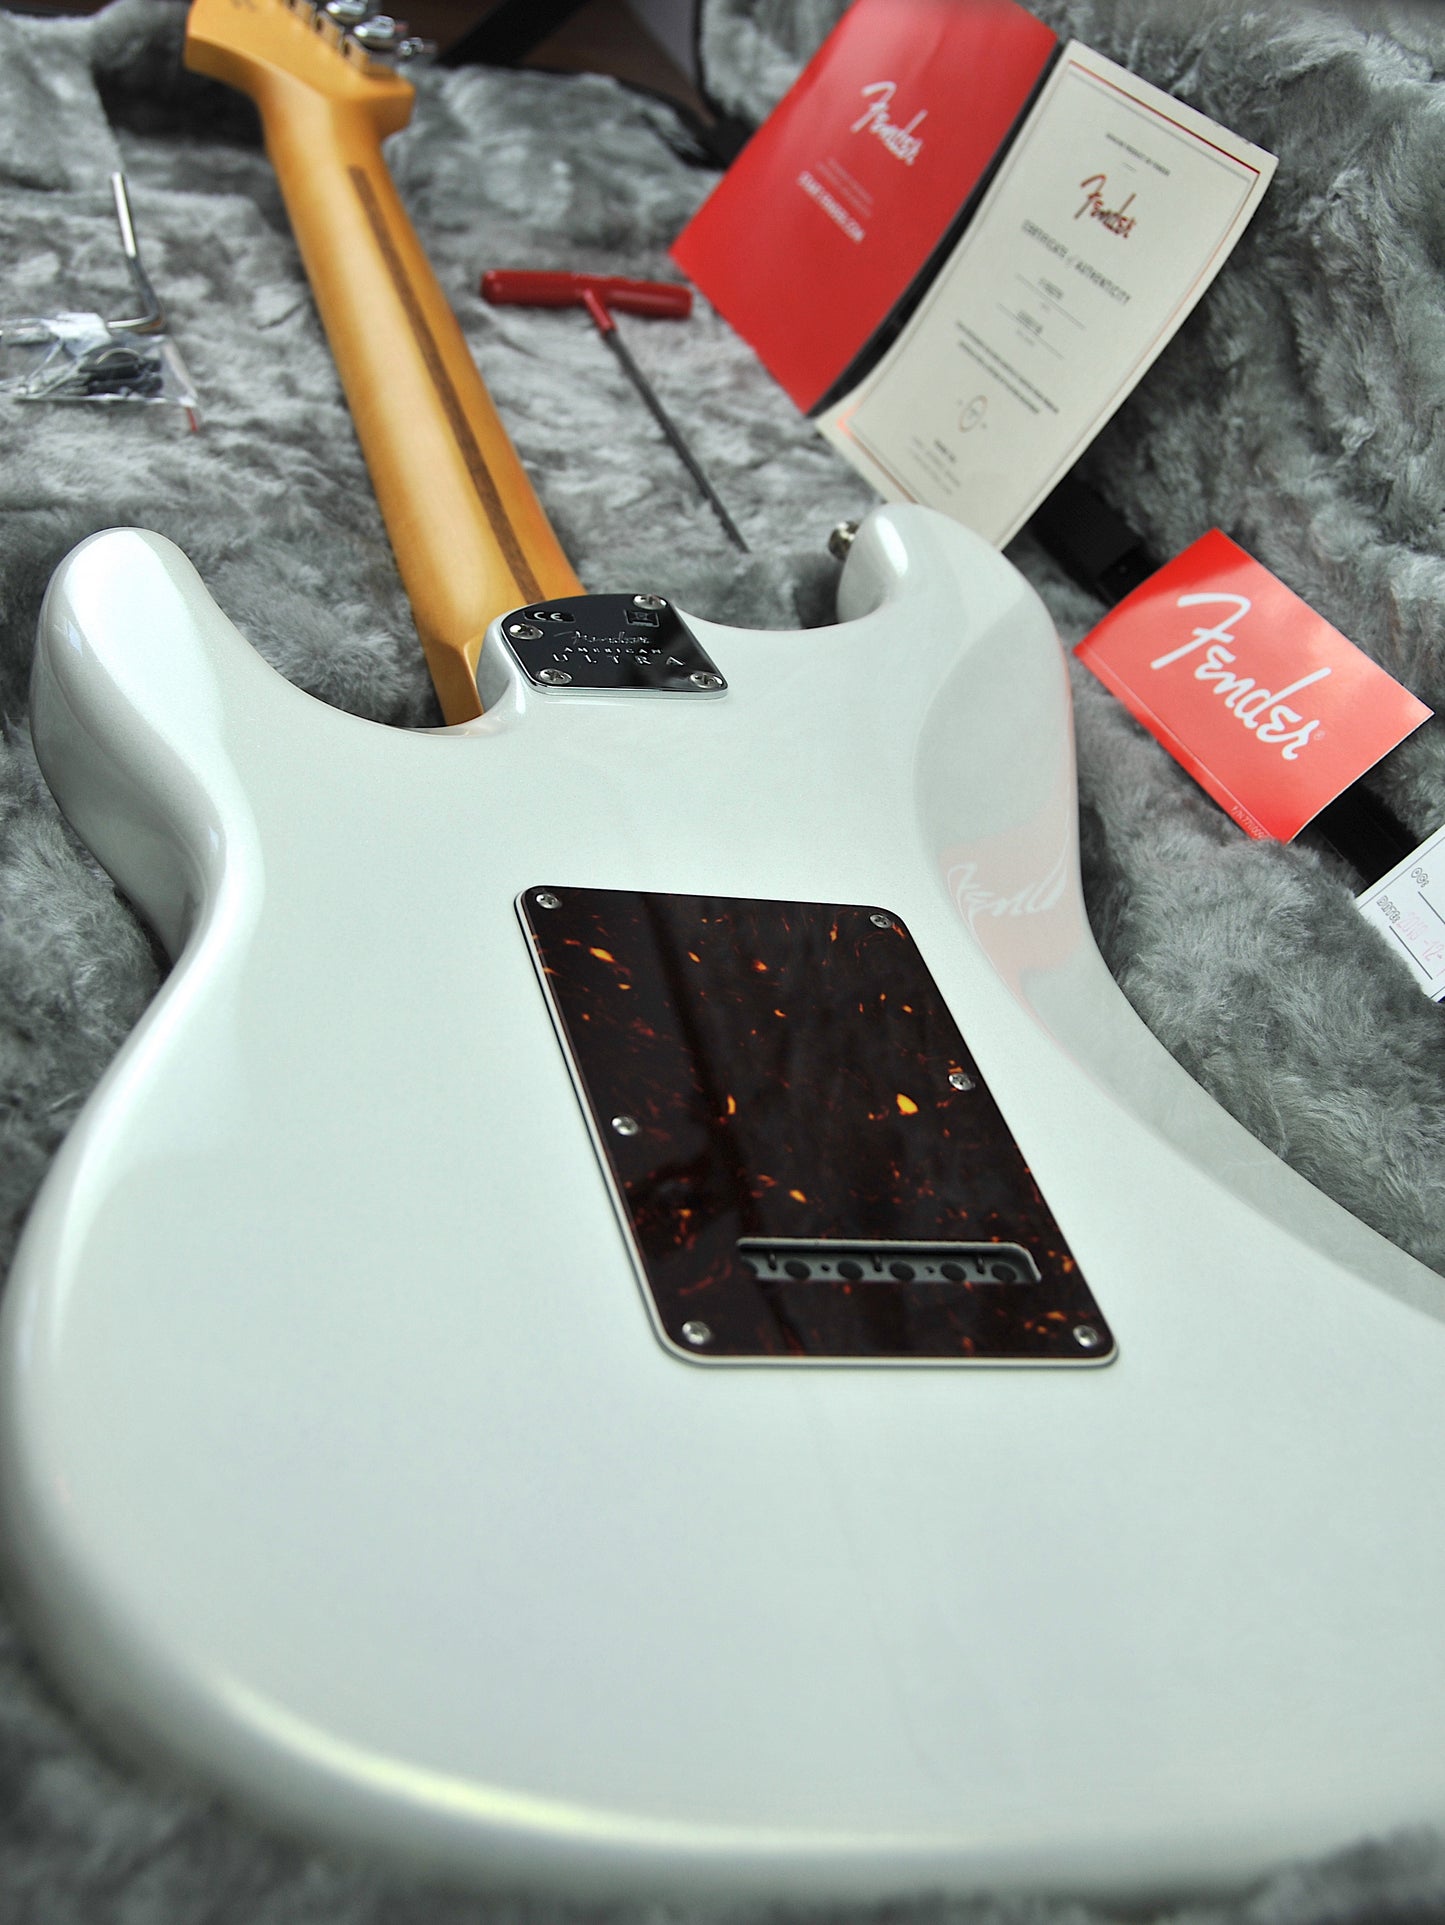 Fender American Ultra Stratocaster HSS 2020 Arctic Pearl